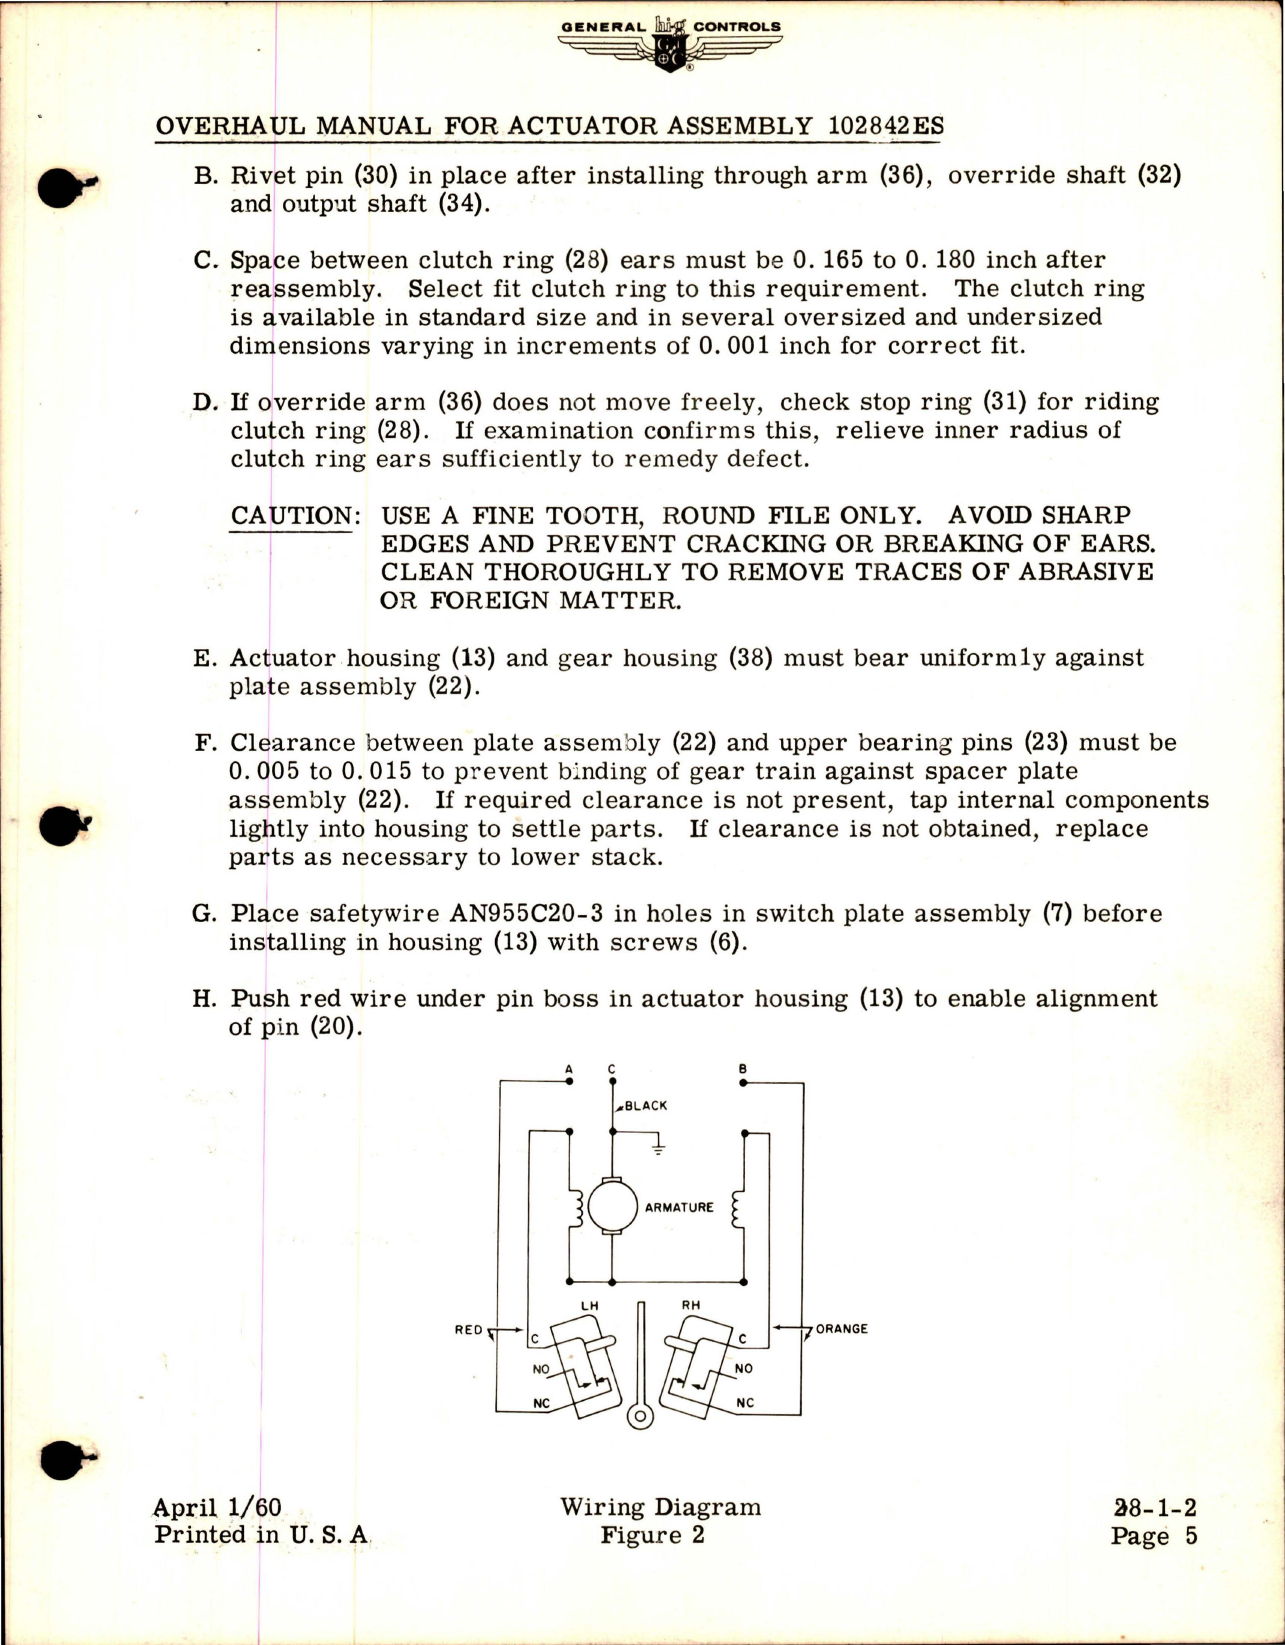 Sample page 5 from AirCorps Library document: Overhaul Manual for Actuator Assembly - 102842ES